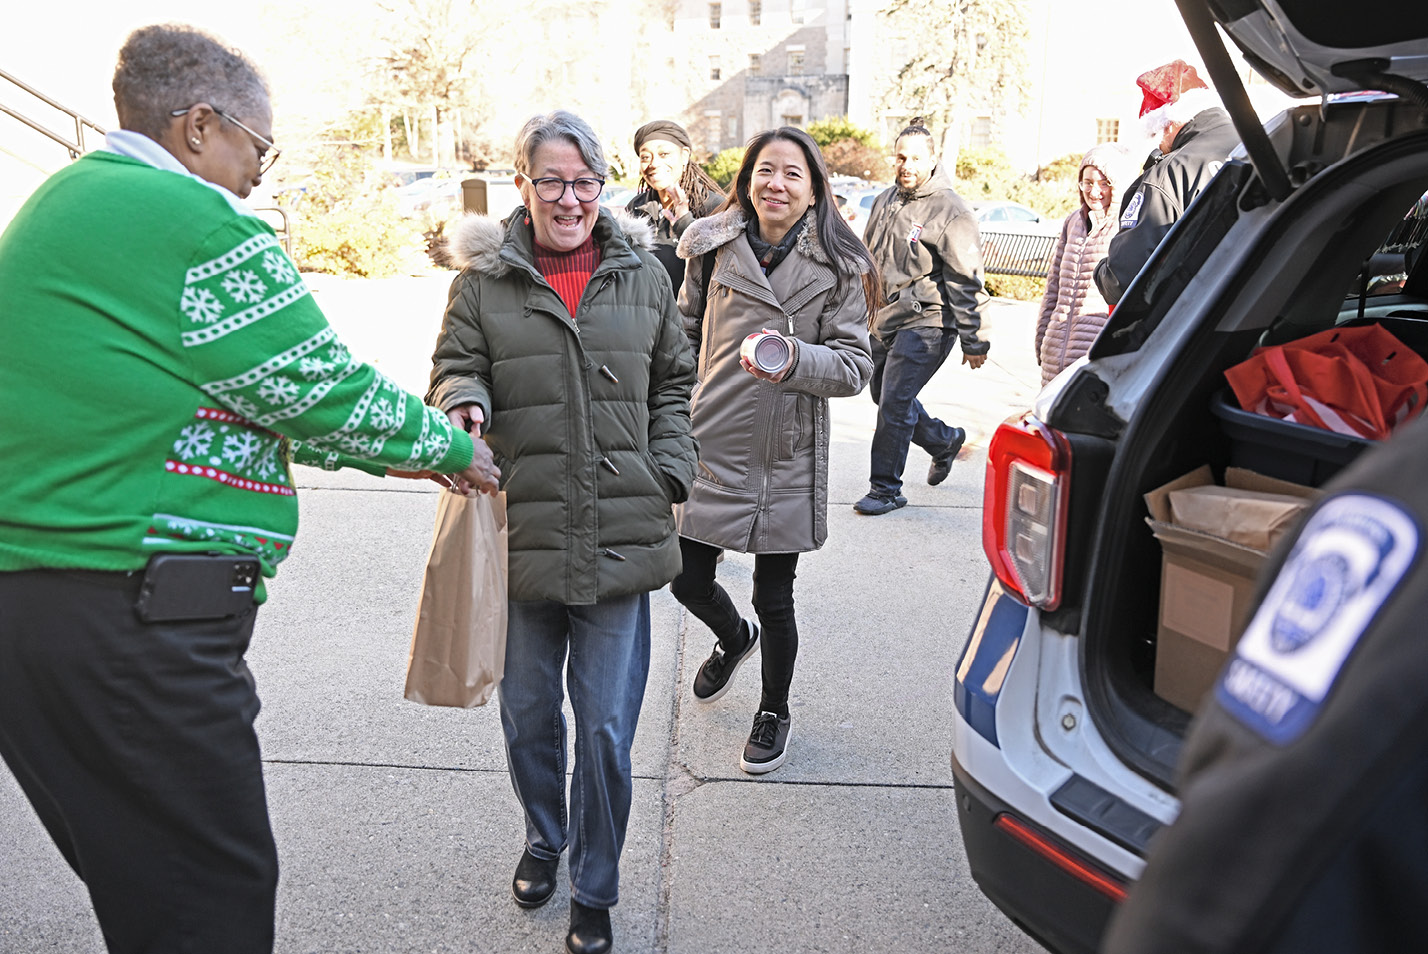 Mary Savage, director of campus safety, collects food for the Gemma E. Moran United Way/Labor Food Center.